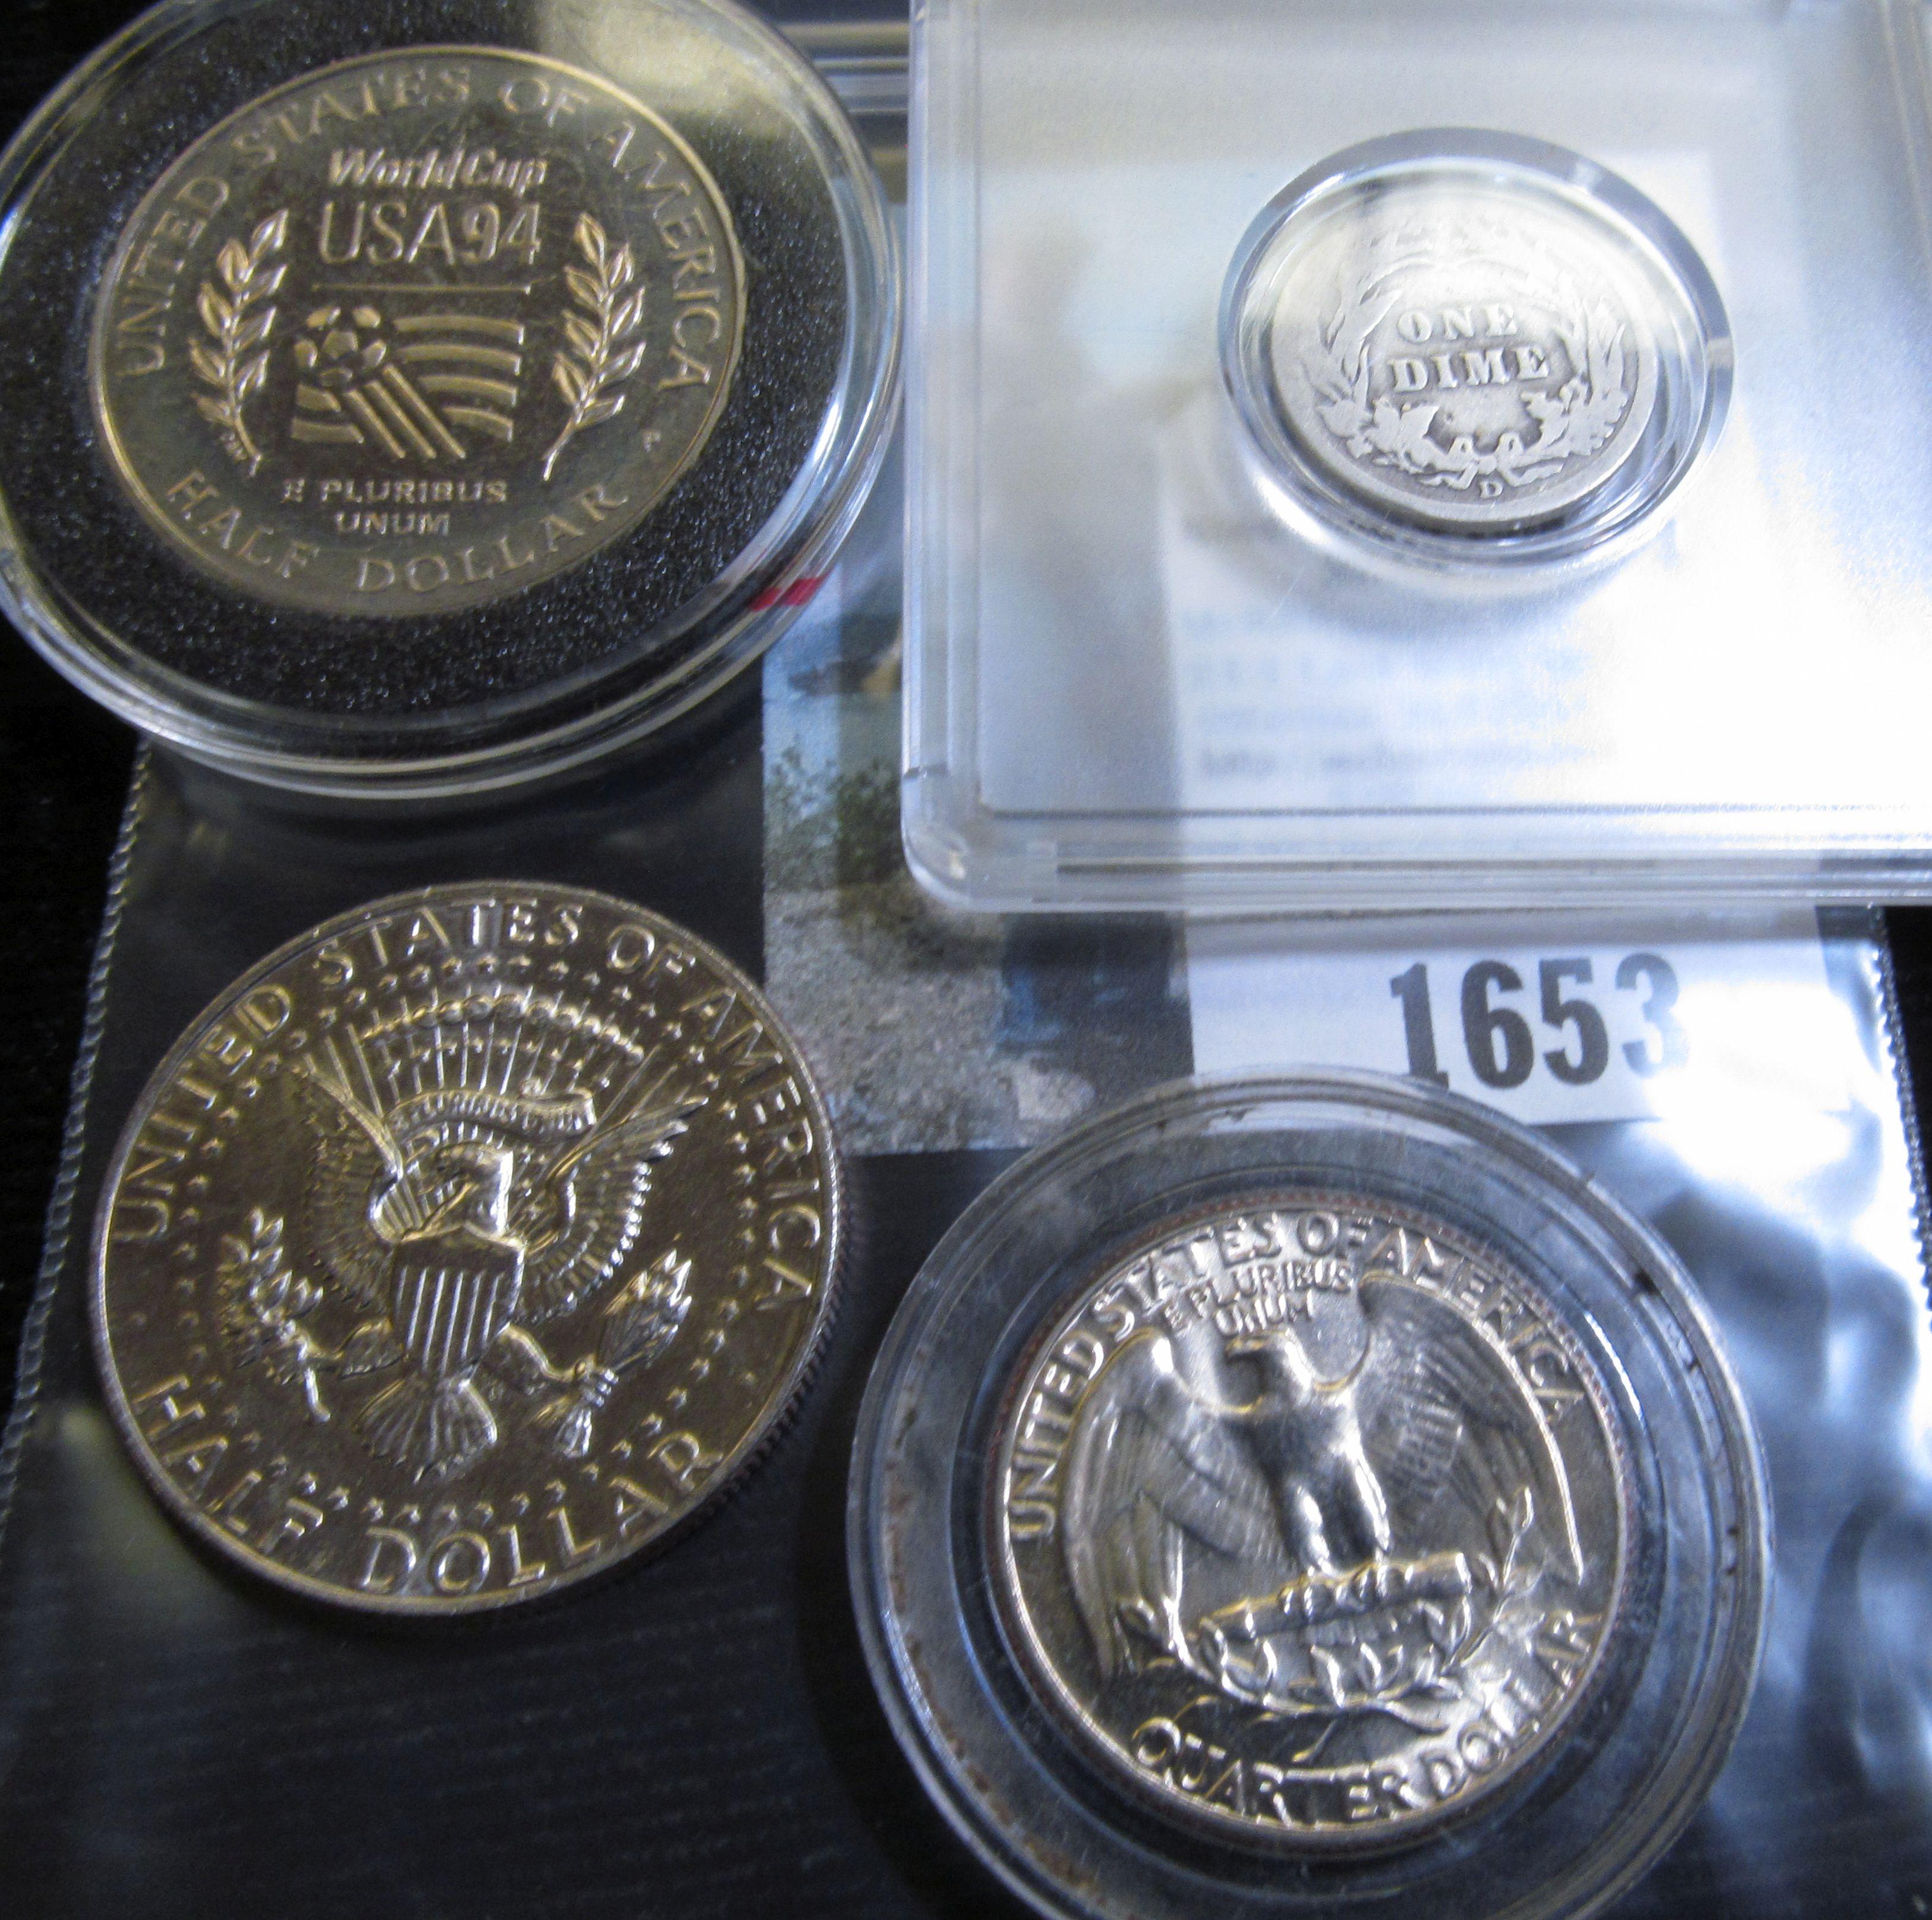 Kennedy Half Dollar with Lincoln's Head sticker on it; 1912 D Barber Dime in a Snaptight case; 1994